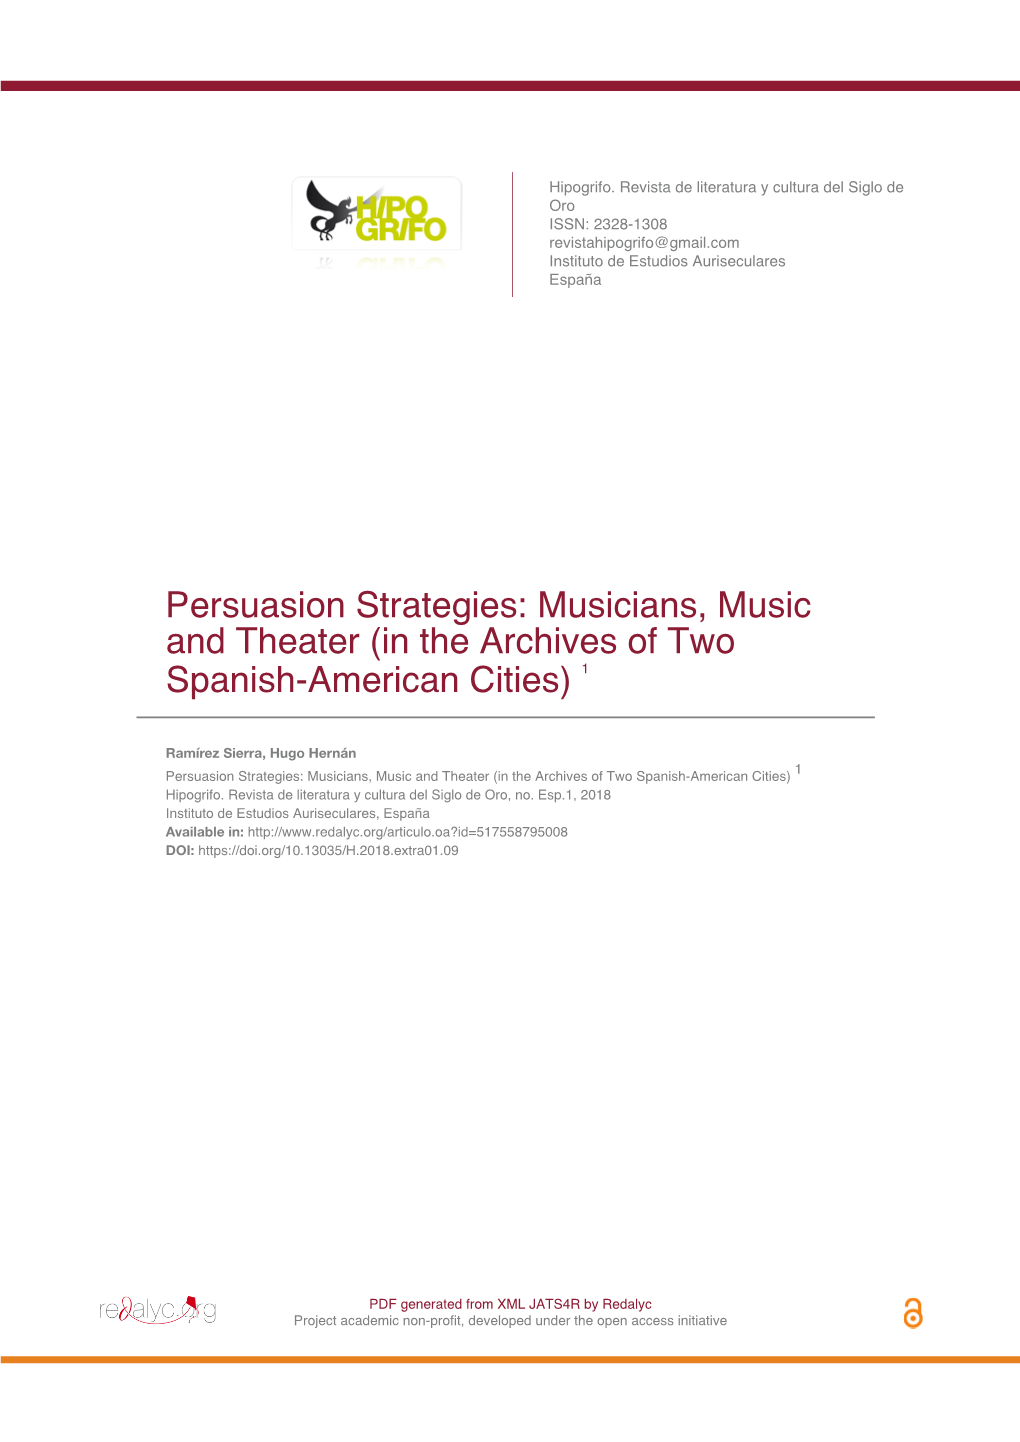 Musicians, Music and Theater (In the Archives of Two Spanish-American Cities) 1